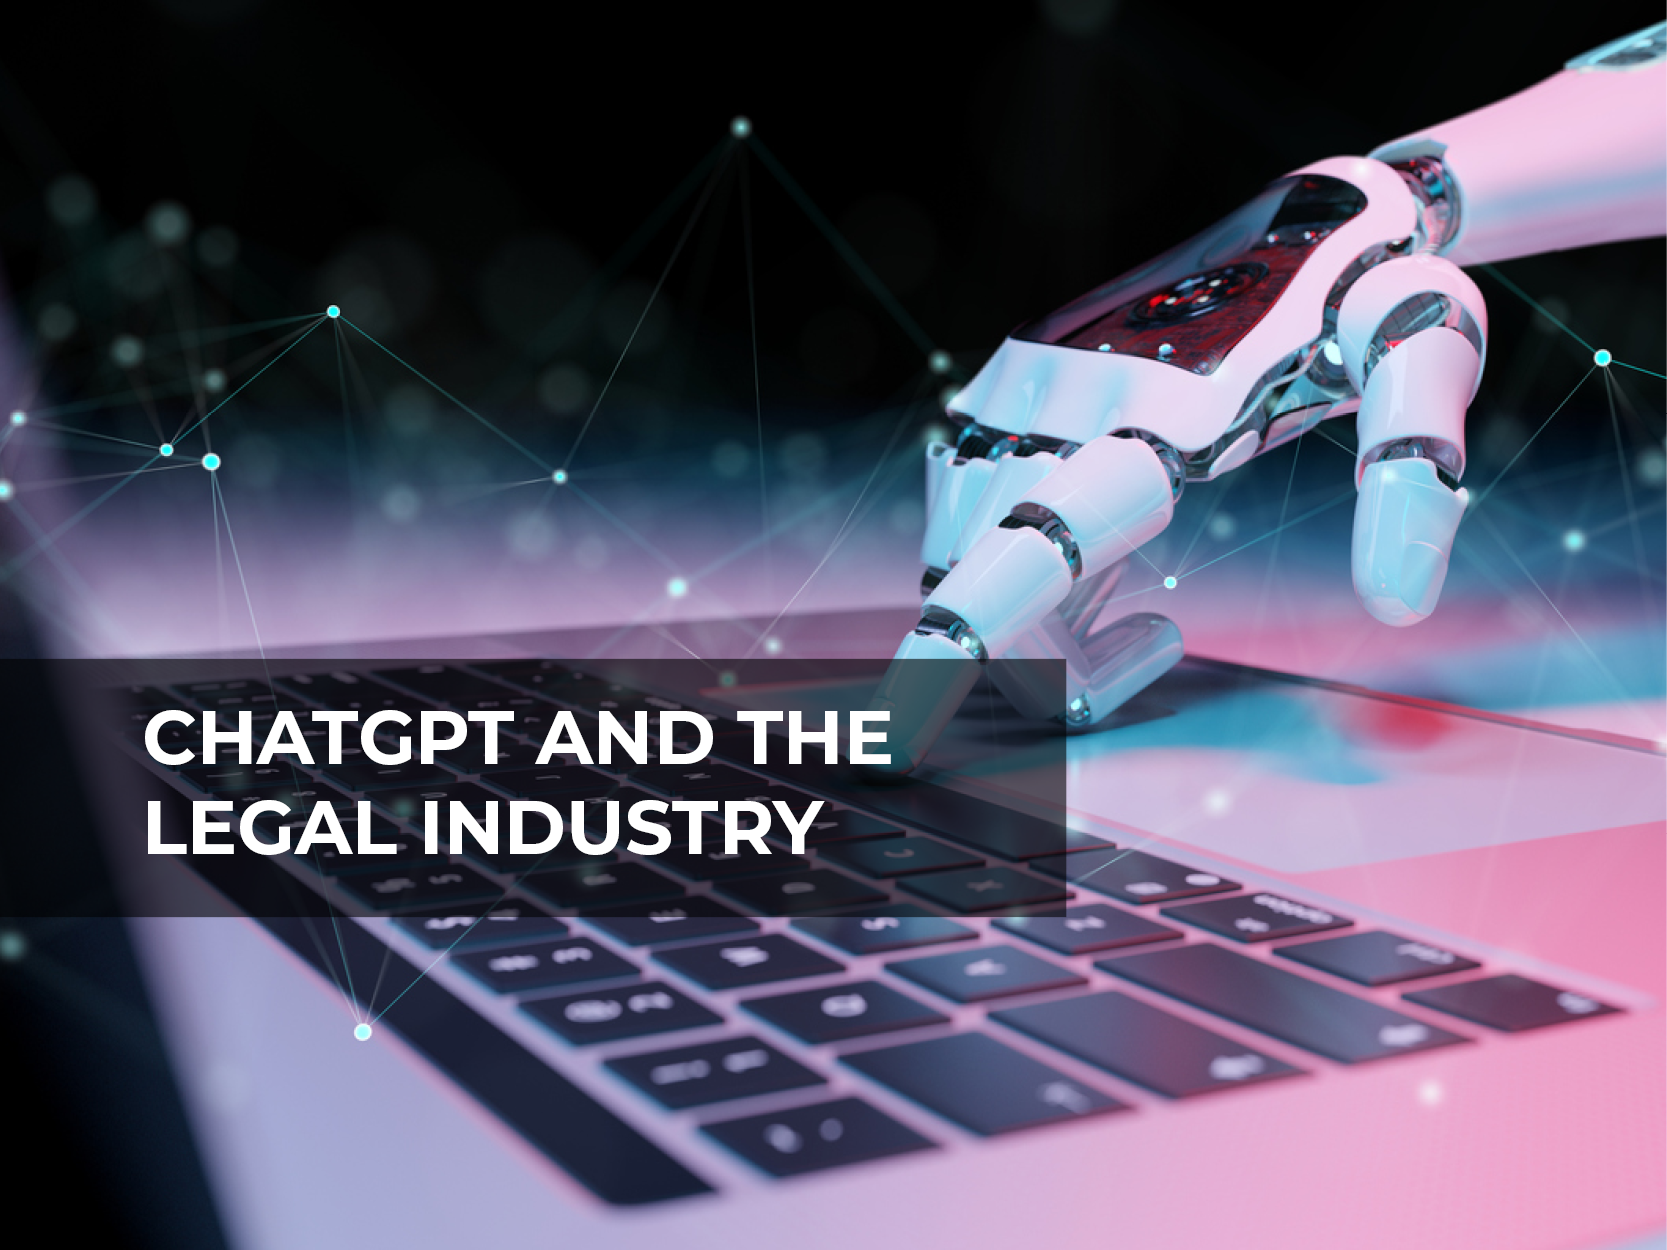 ChatGPT and the legal industry